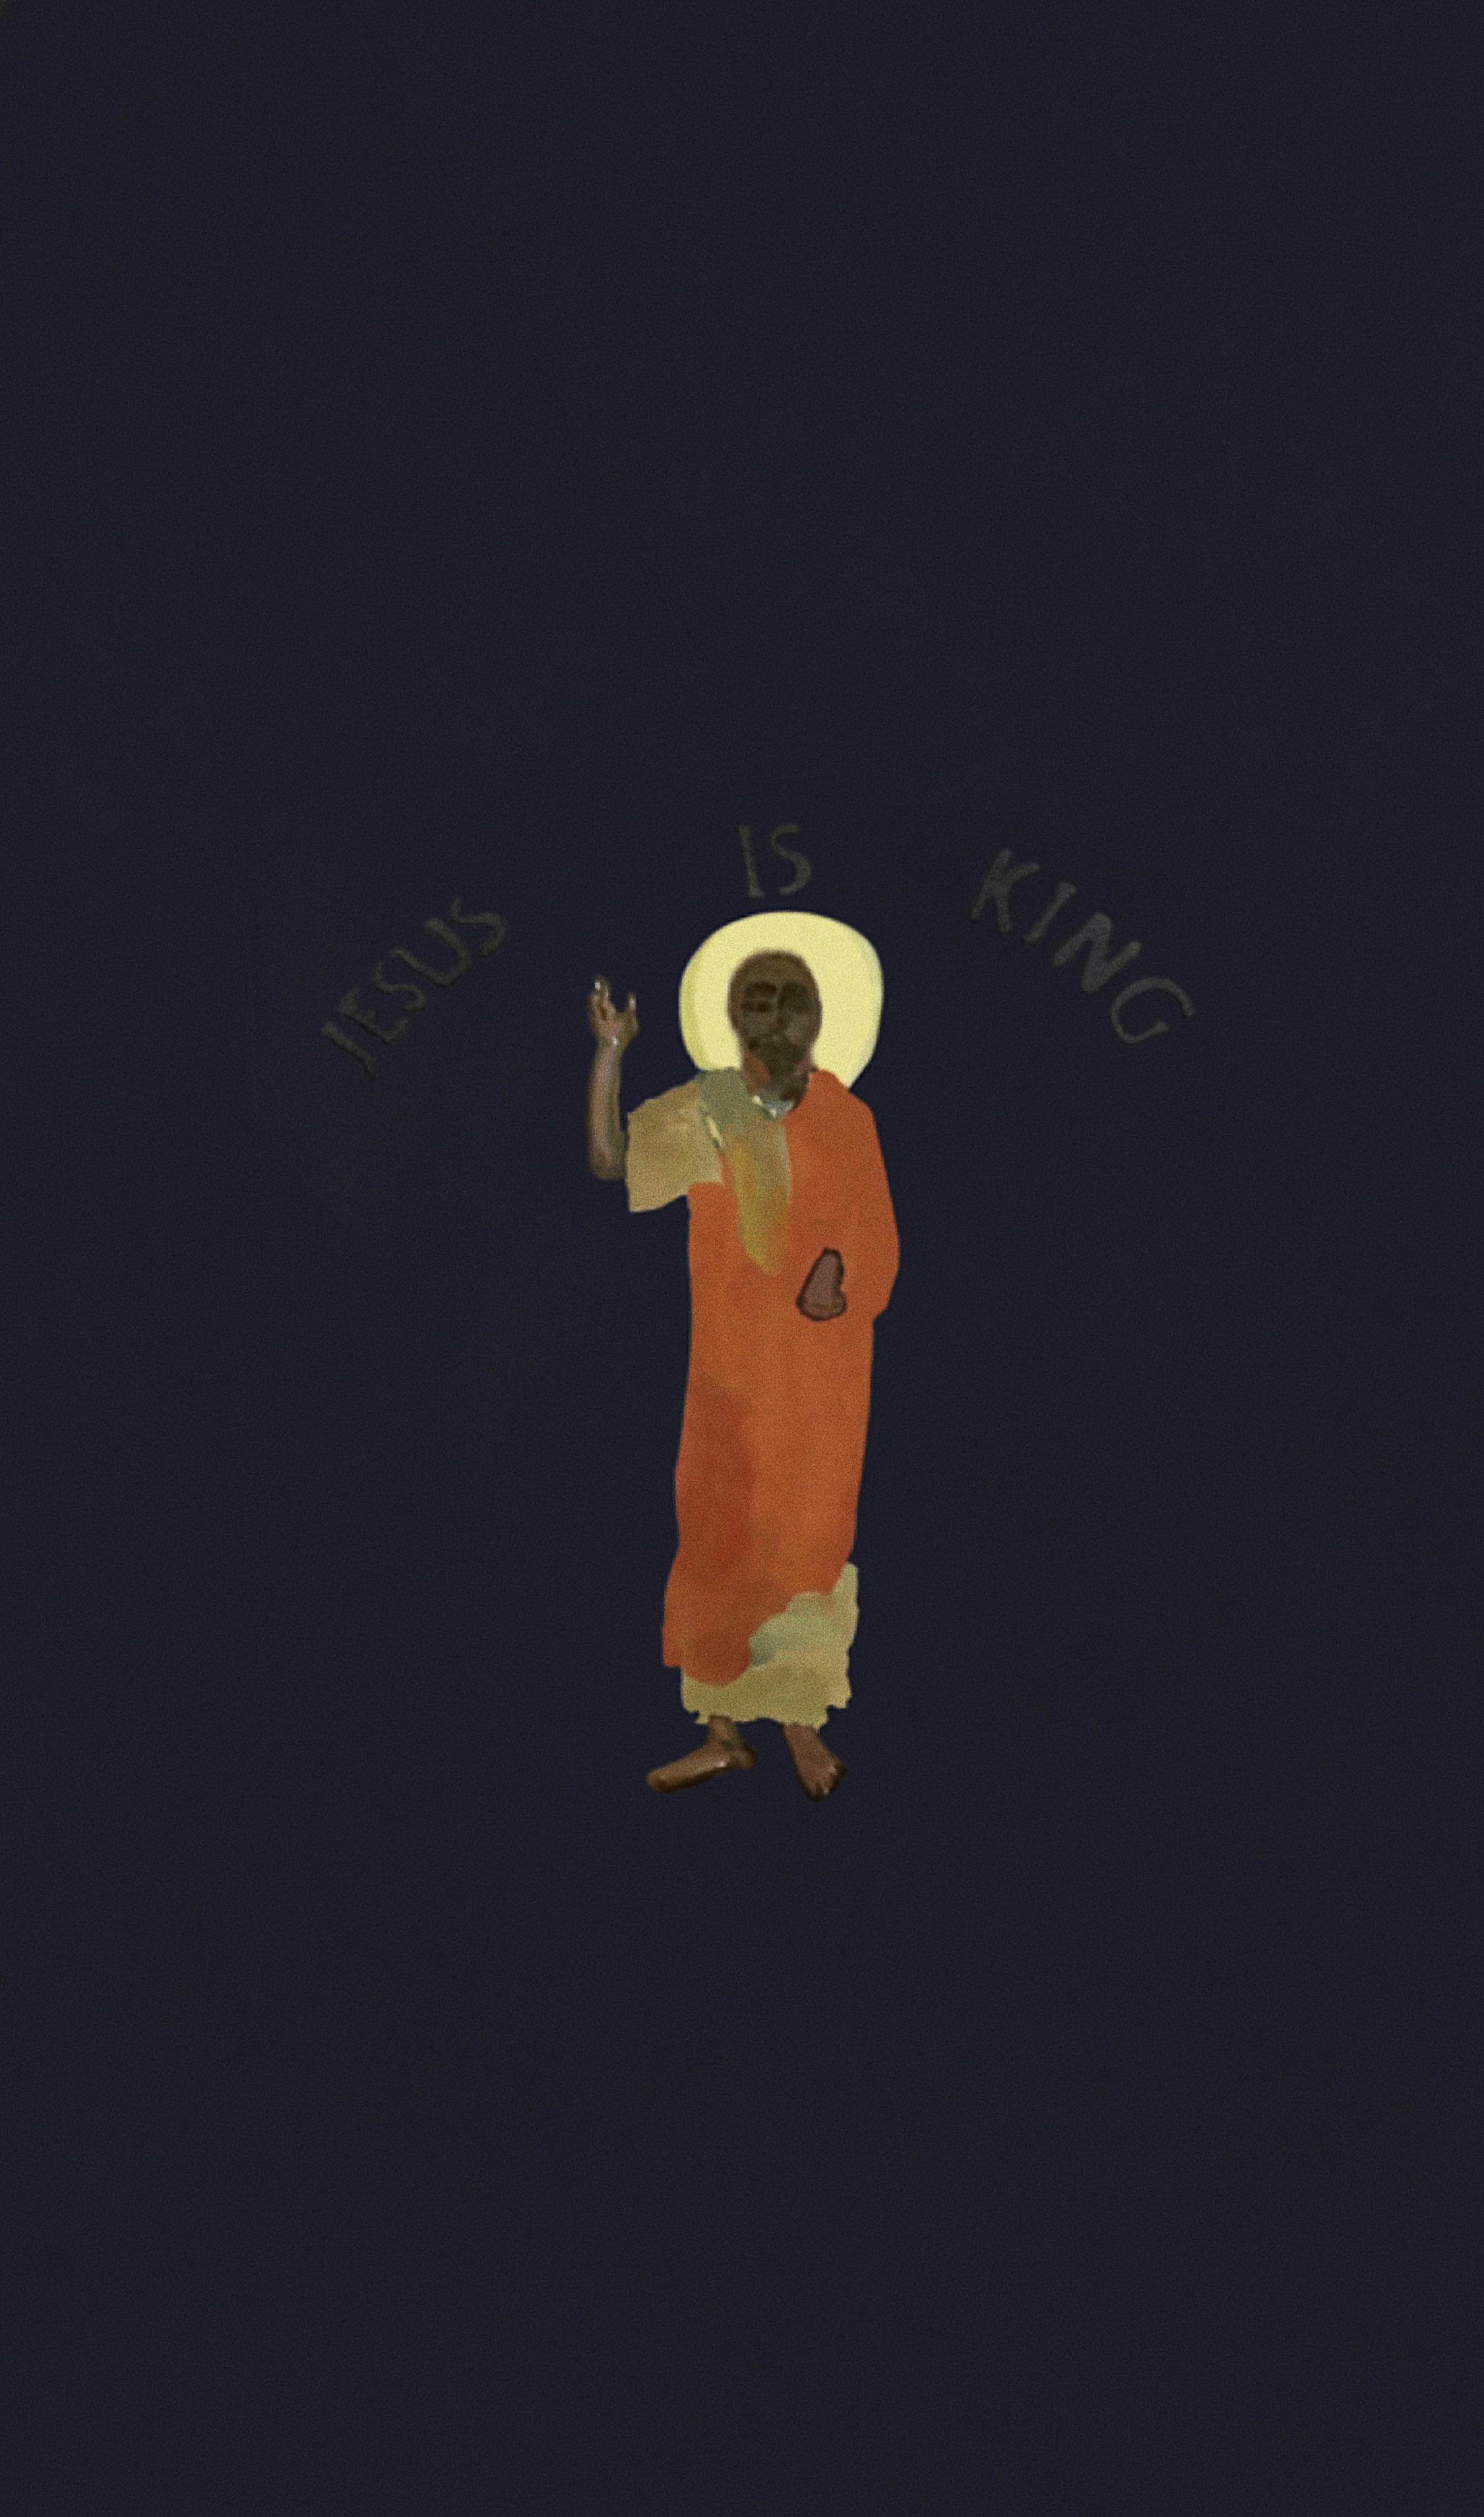 So, I made a quick wallpaper of Jesus is King for you guys, enjoy